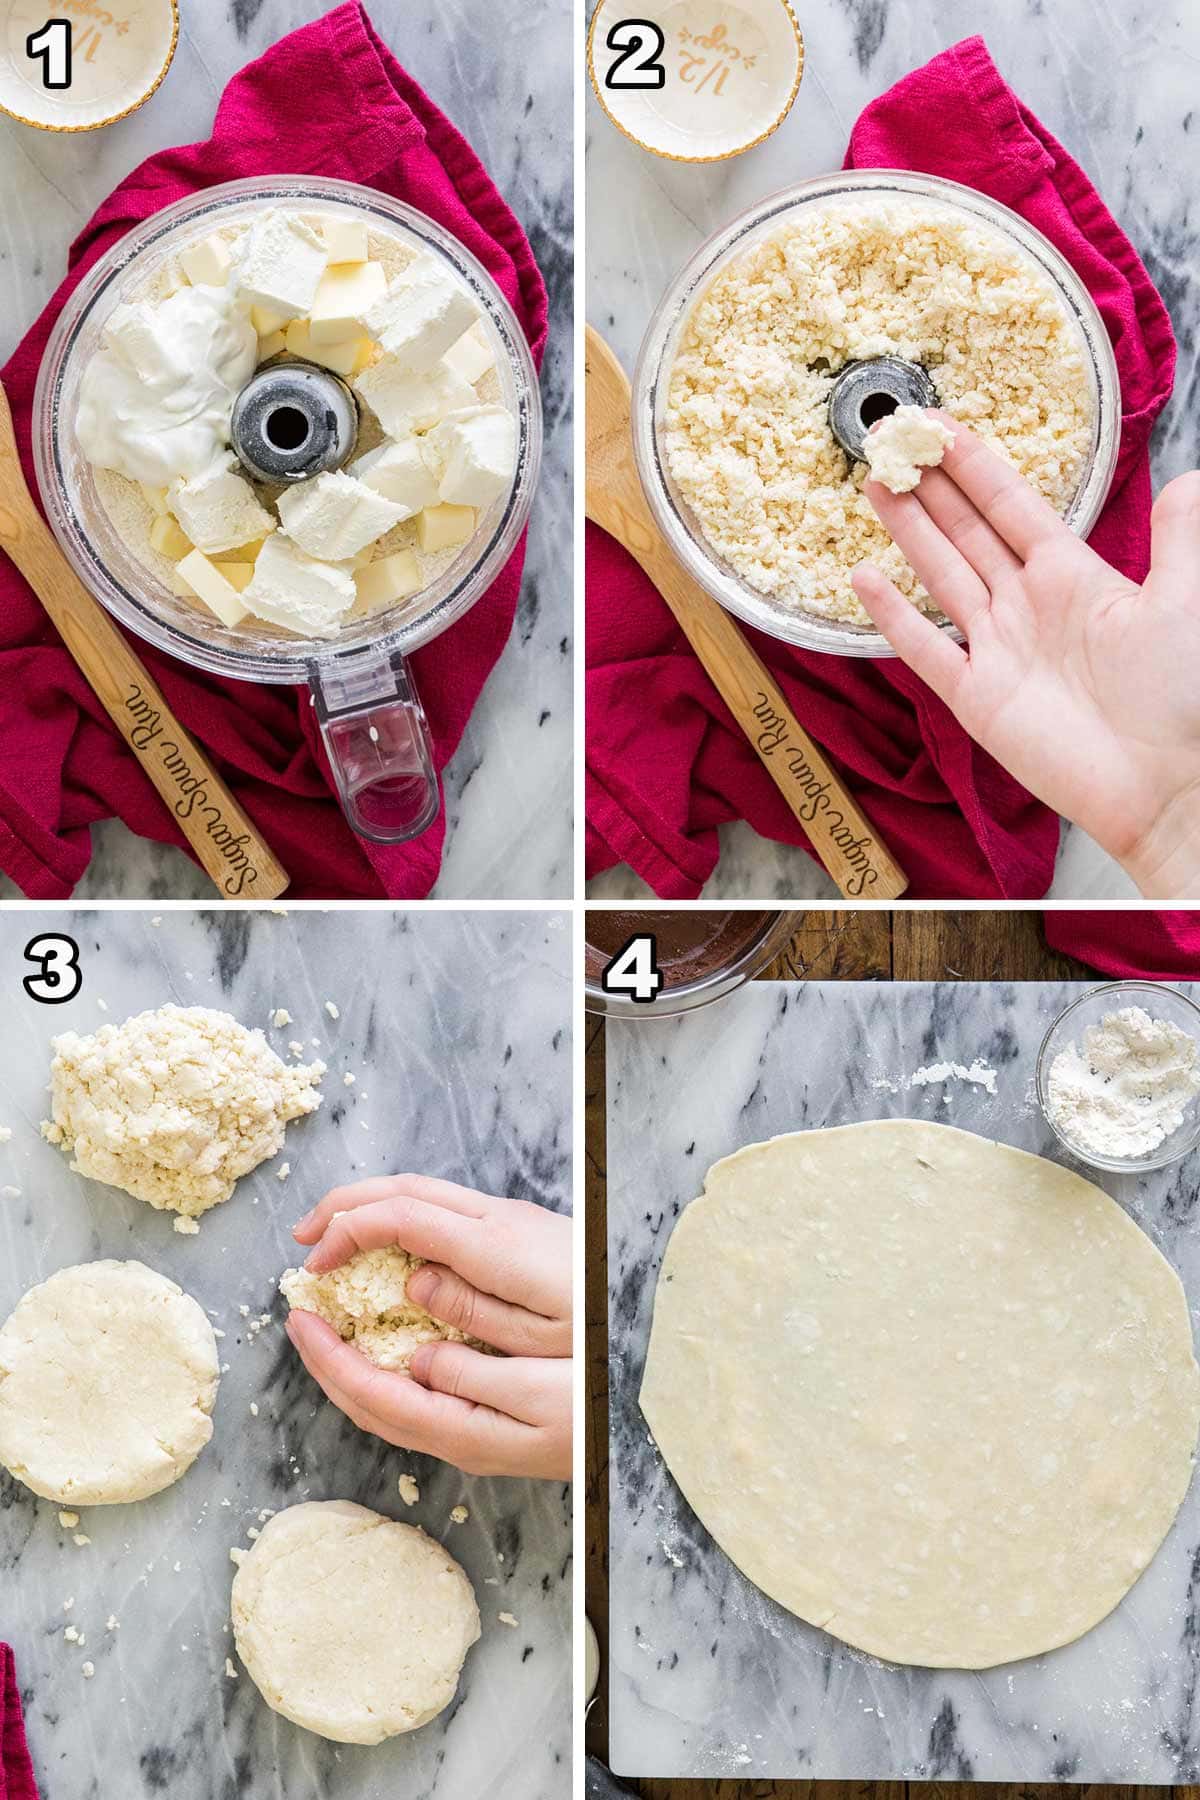 collage of preparing rugelach 1) ingredients in food processor 2) crumbly dough in hand 3) dividing dough into 4 pieces 4) dough rolled into circle